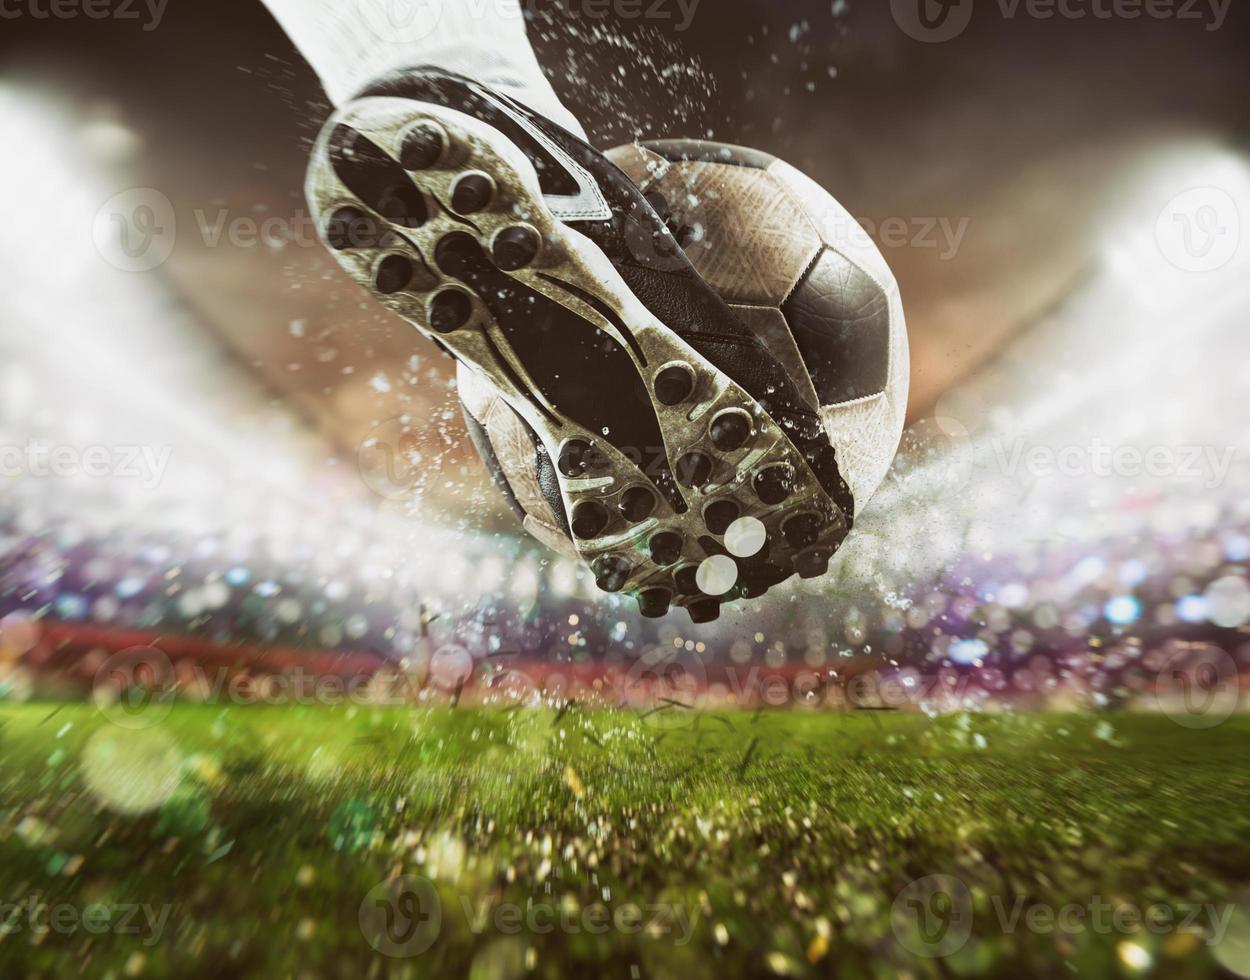 Football scene at night match with close up of a soccer shoe hitting the ball with power photo